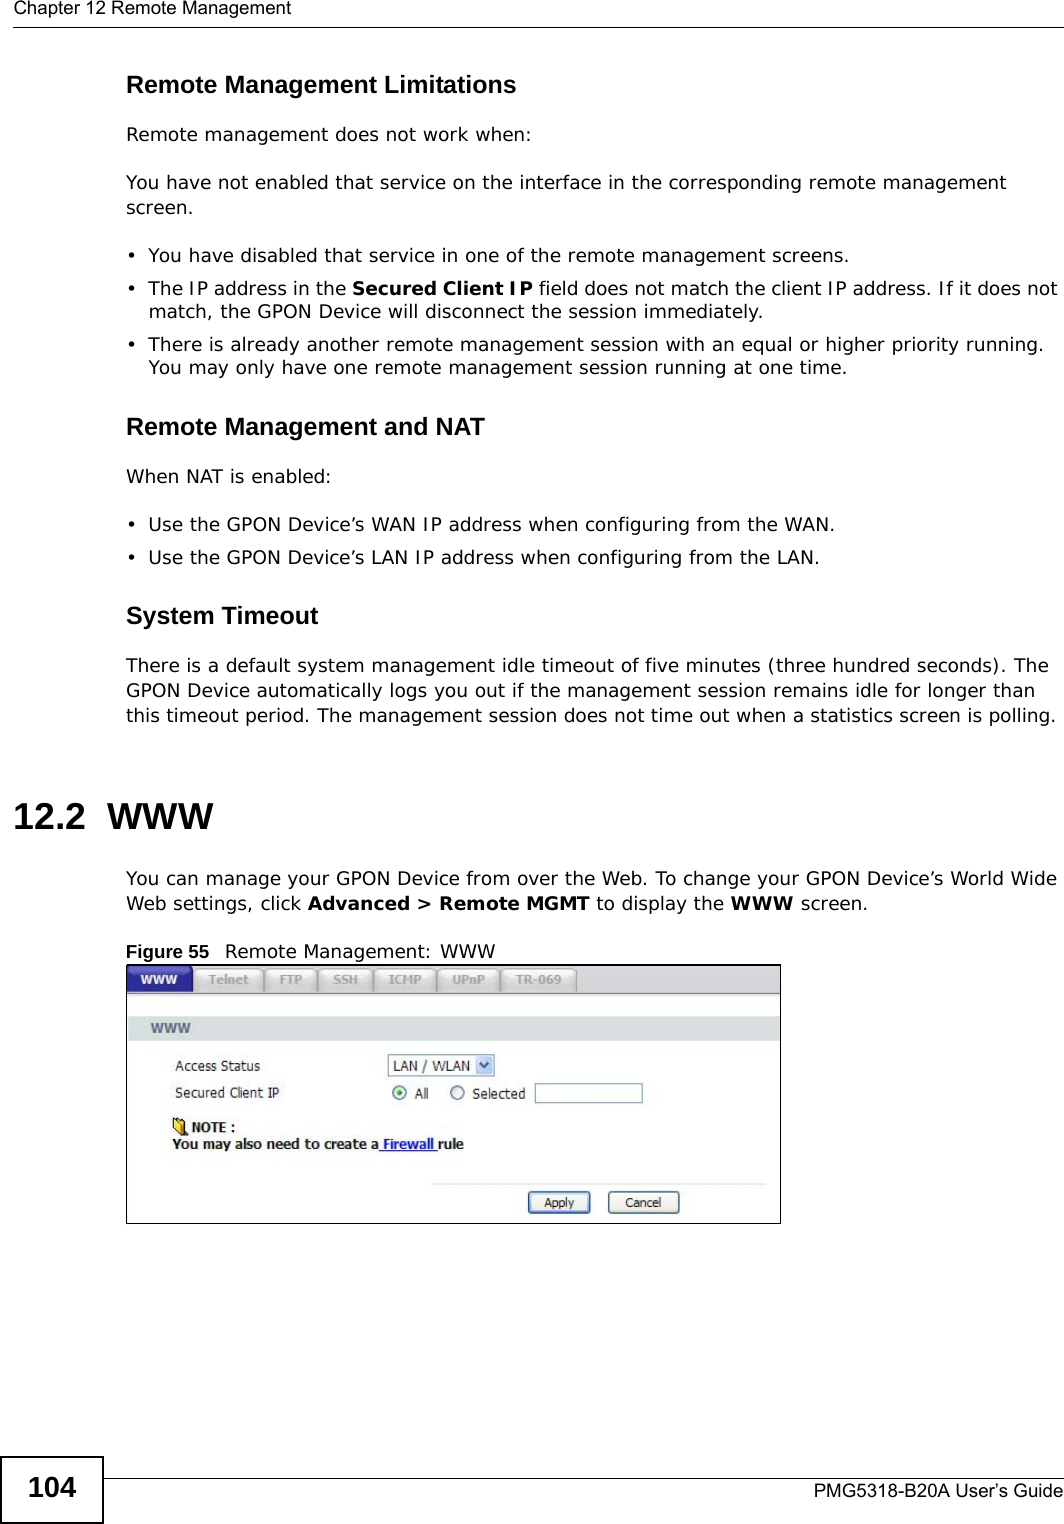 Chapter 12 Remote ManagementPMG5318-B20A User’s Guide104Remote Management LimitationsRemote management does not work when:You have not enabled that service on the interface in the corresponding remote management screen.• You have disabled that service in one of the remote management screens.• The IP address in the Secured Client IP field does not match the client IP address. If it does not match, the GPON Device will disconnect the session immediately.• There is already another remote management session with an equal or higher priority running. You may only have one remote management session running at one time.Remote Management and NATWhen NAT is enabled:•Use the GPON Device’s WAN IP address when configuring from the WAN. • Use the GPON Device’s LAN IP address when configuring from the LAN.System TimeoutThere is a default system management idle timeout of five minutes (three hundred seconds). The GPON Device automatically logs you out if the management session remains idle for longer than this timeout period. The management session does not time out when a statistics screen is polling. 12.2  WWW You can manage your GPON Device from over the Web. To change your GPON Device’s World Wide Web settings, click Advanced &gt; Remote MGMT to display the WWW screen.Figure 55   Remote Management: WWW